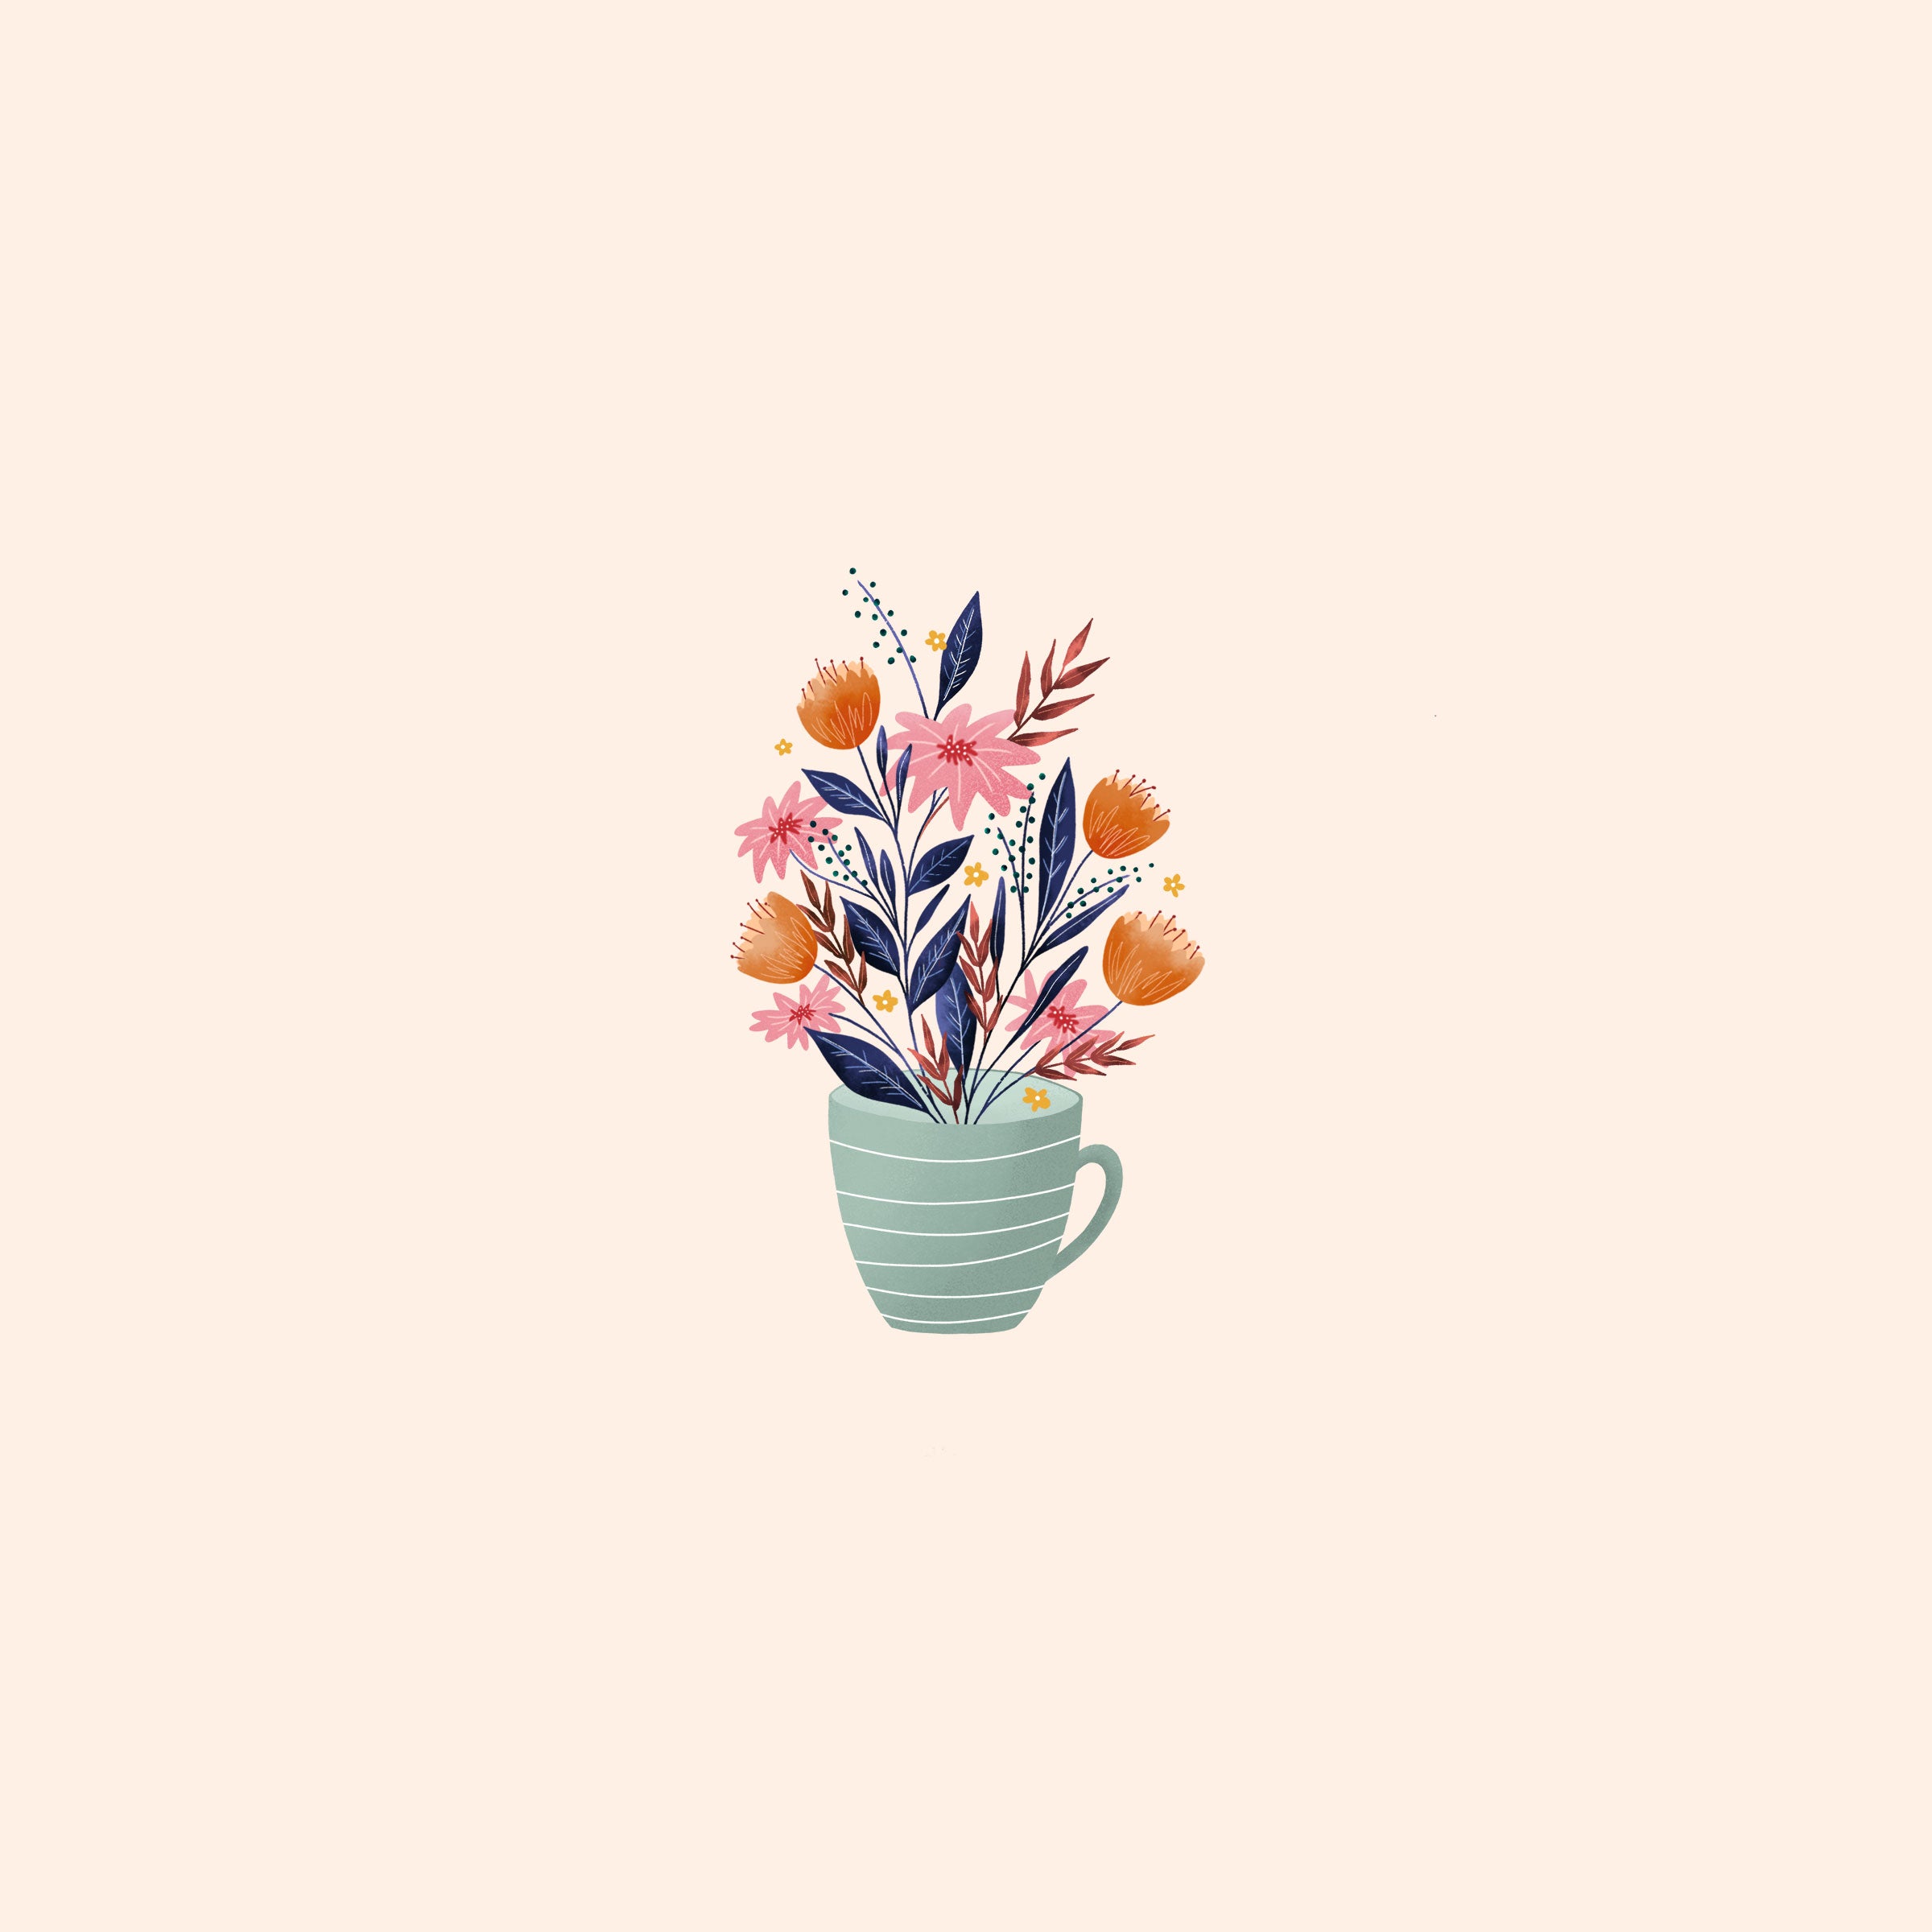 A cup of flowers in an illustration - Tulip